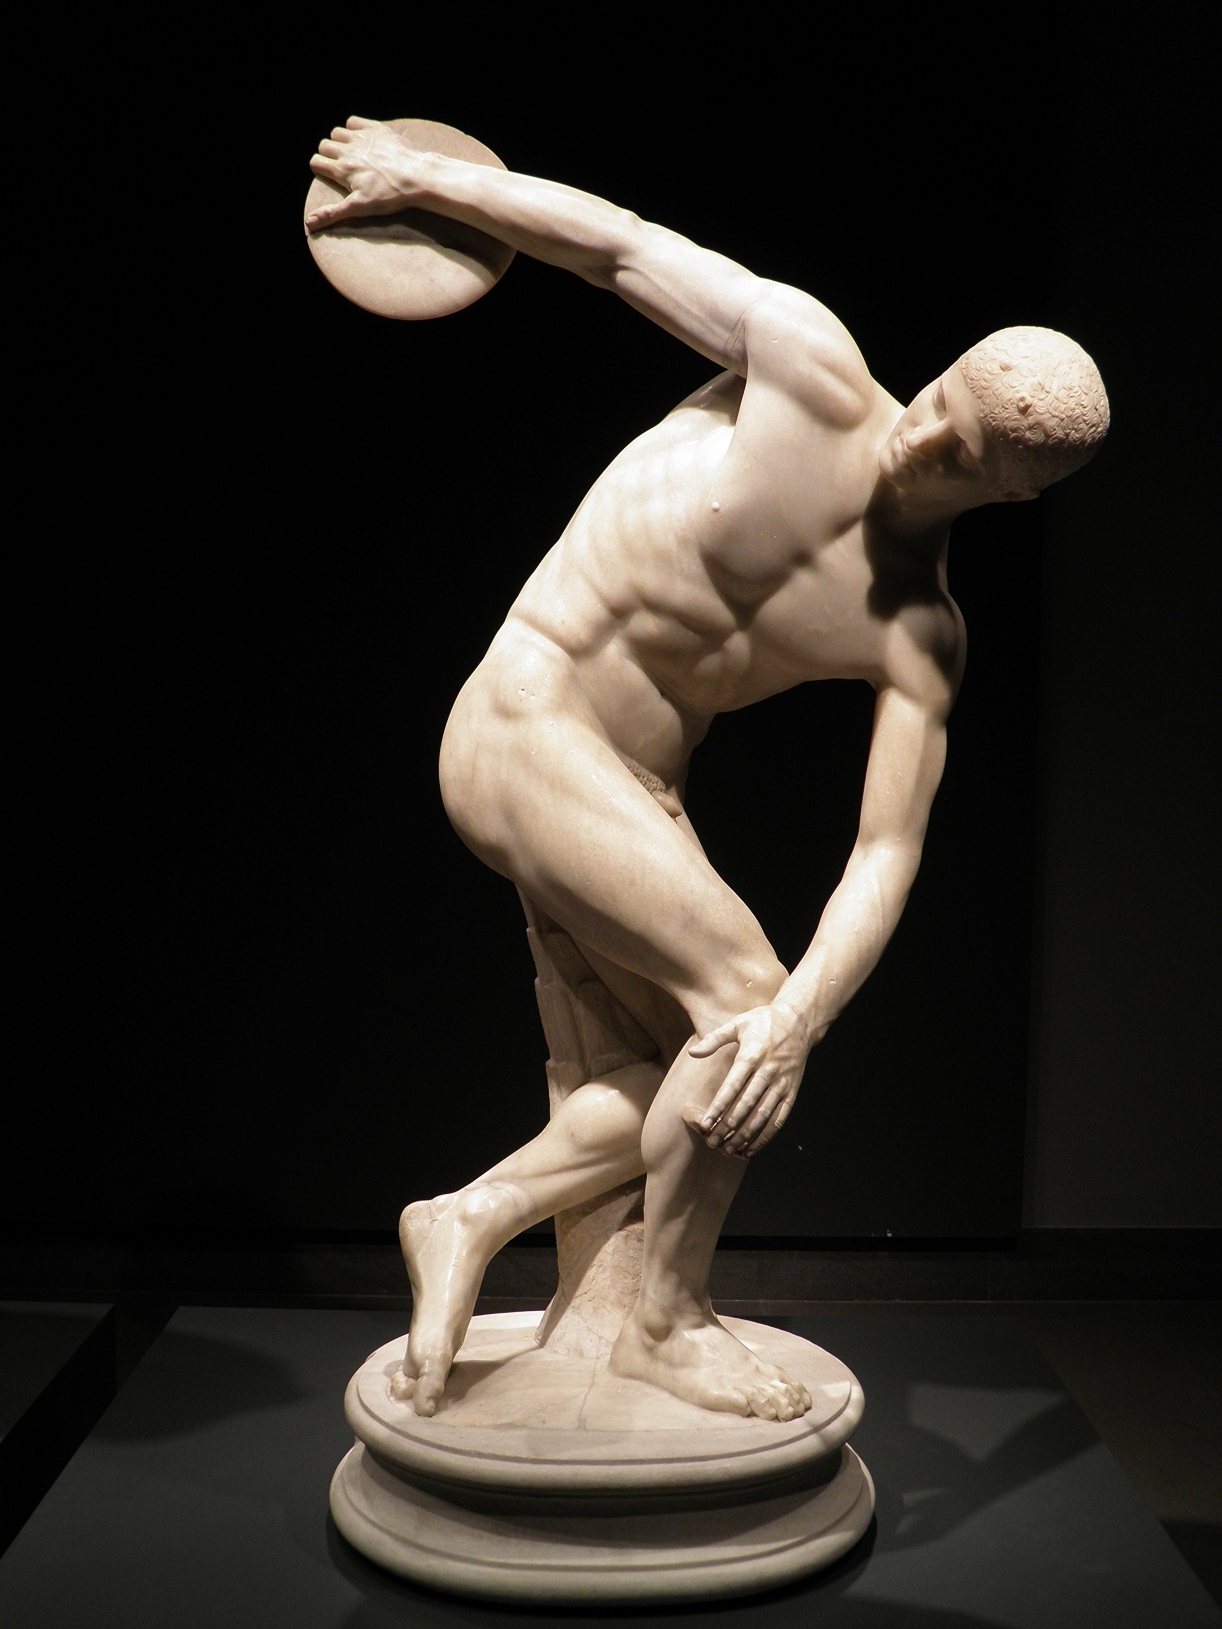 Roman copy of the Greek Discobolus by the sculptor Myron, source: wikimediacommons